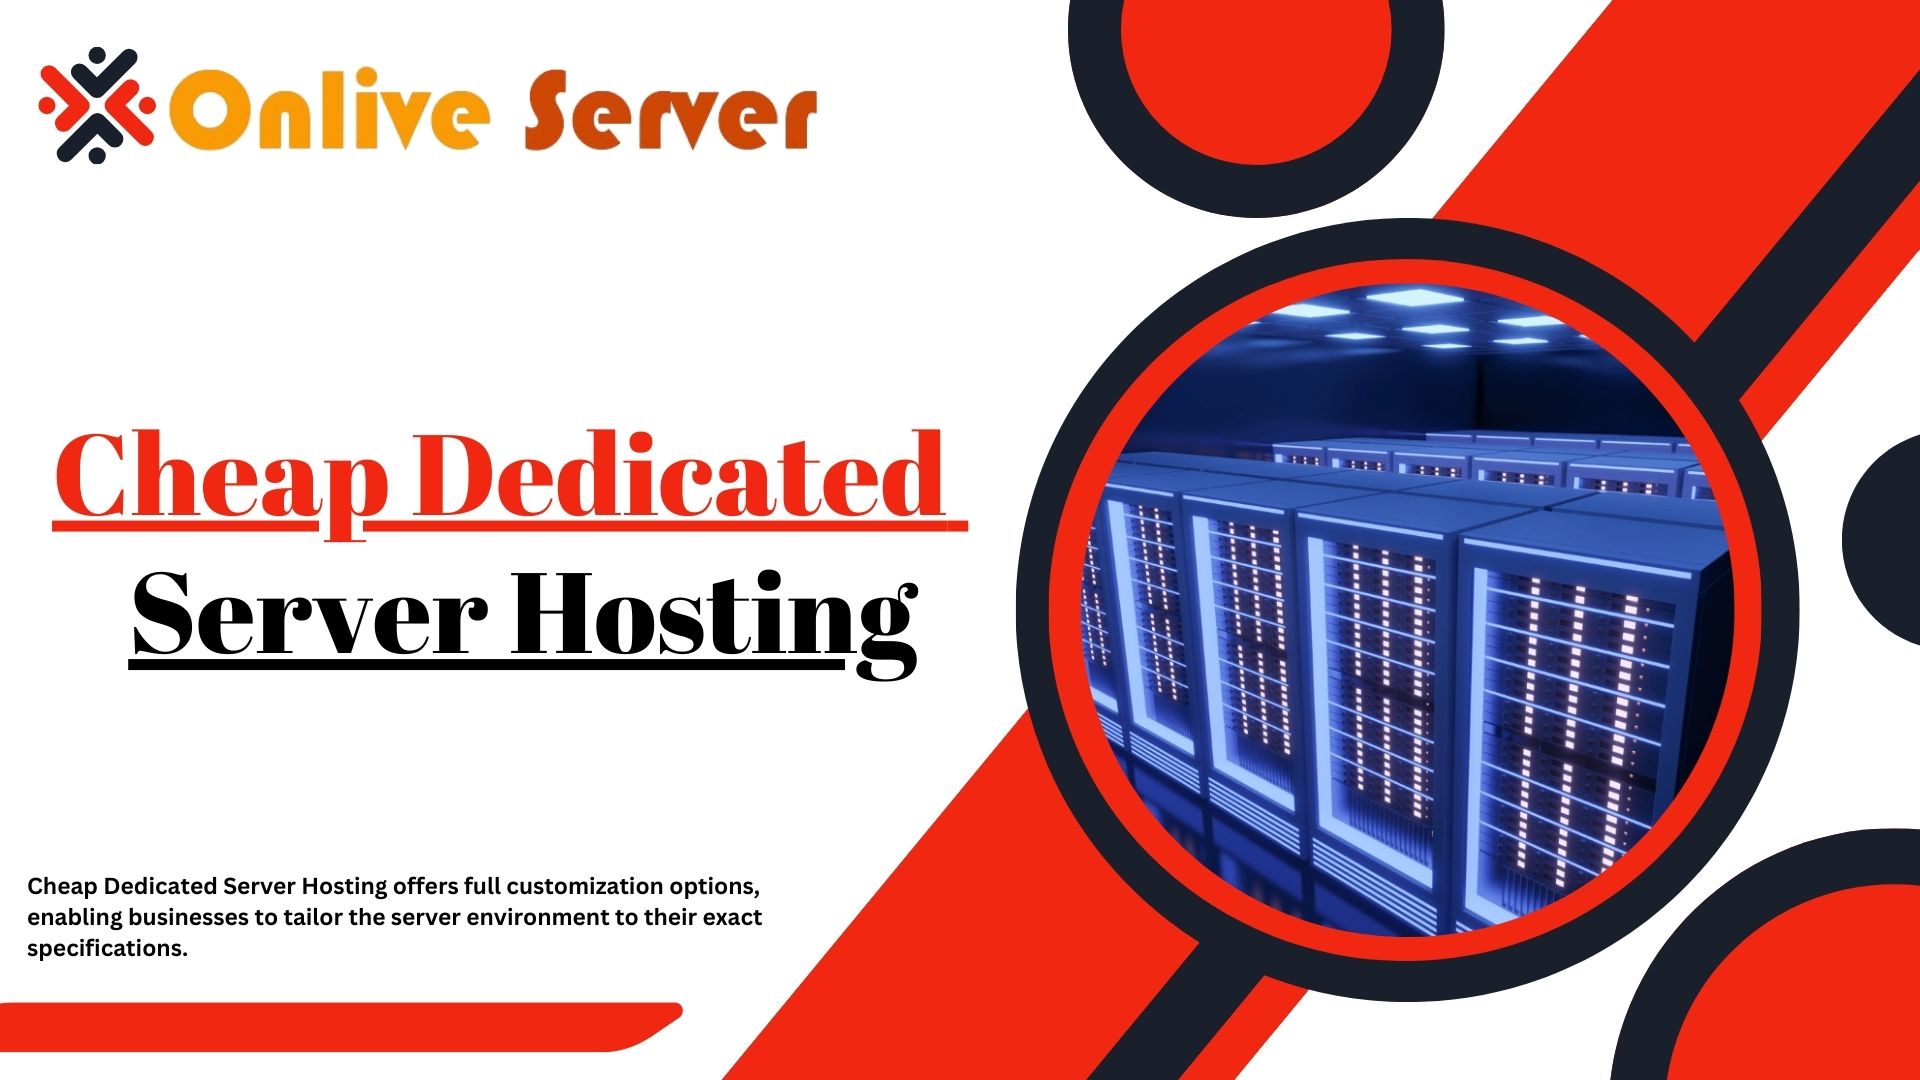 How to Use Cheap Dedicated Server Hosting for Your Business